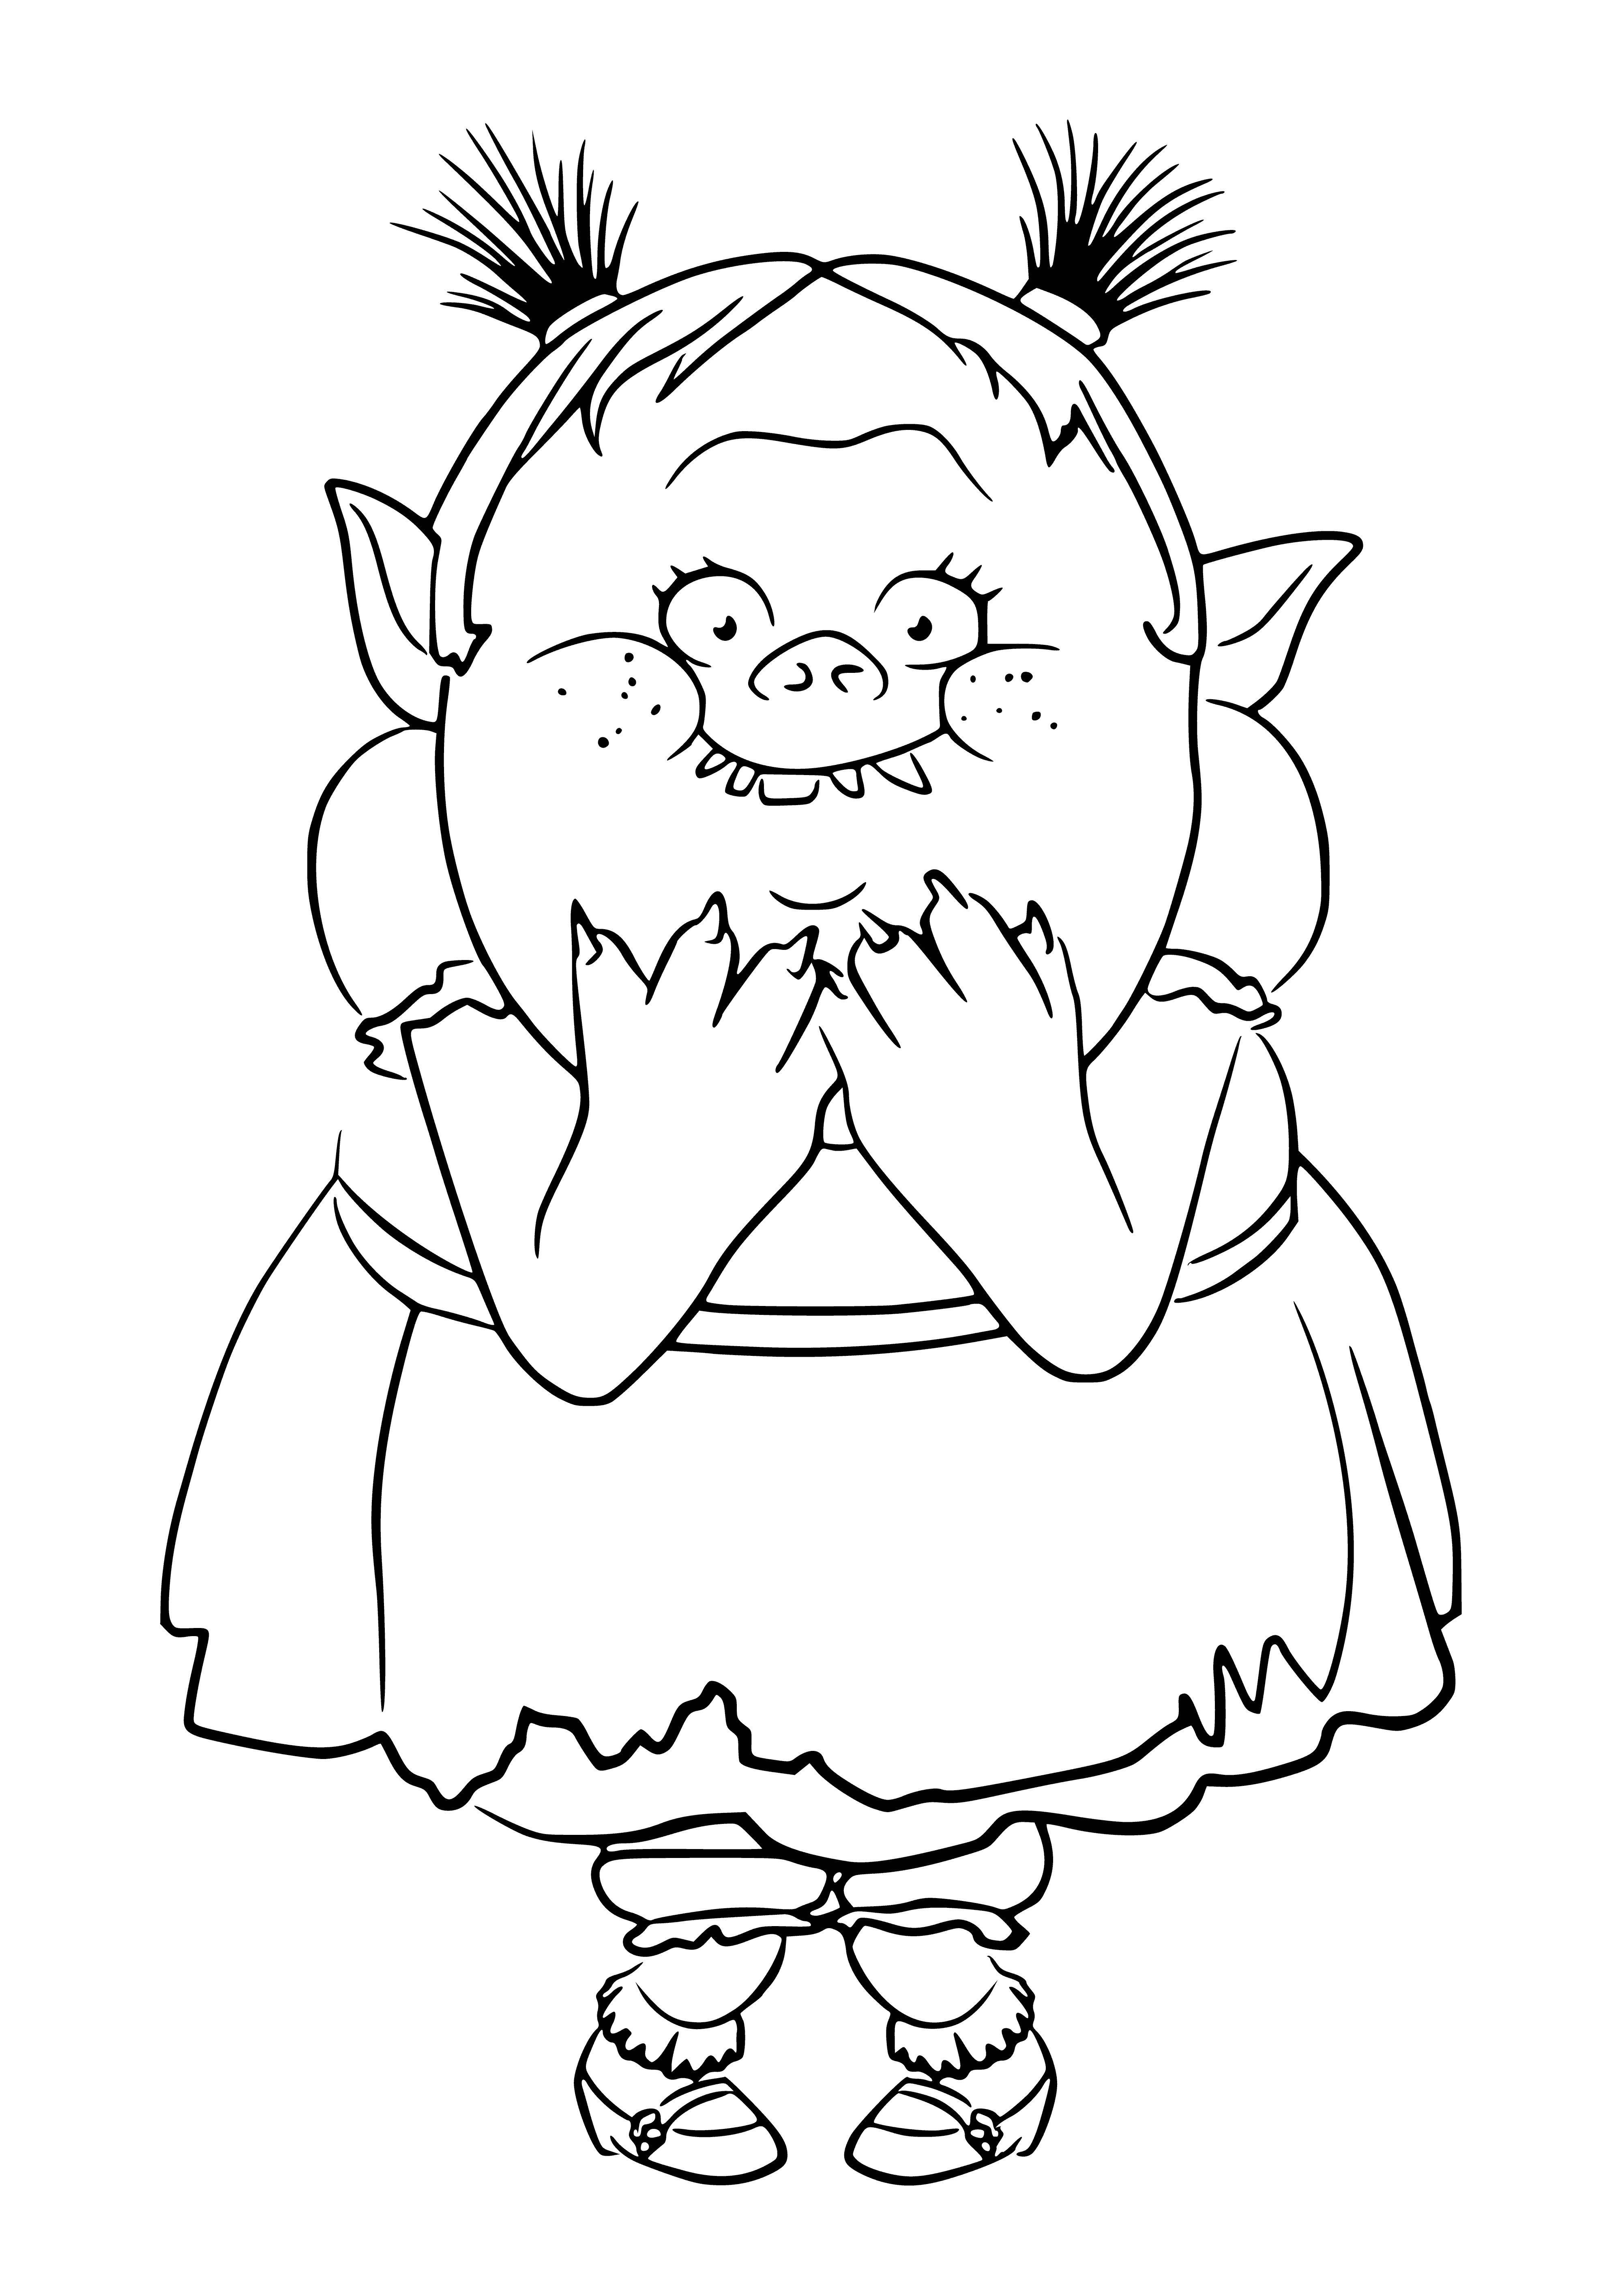 coloring page: Trolls lurk in dark corners with sharp teeth and small, beady eyes, waiting to pounce on unsuspecting prey.